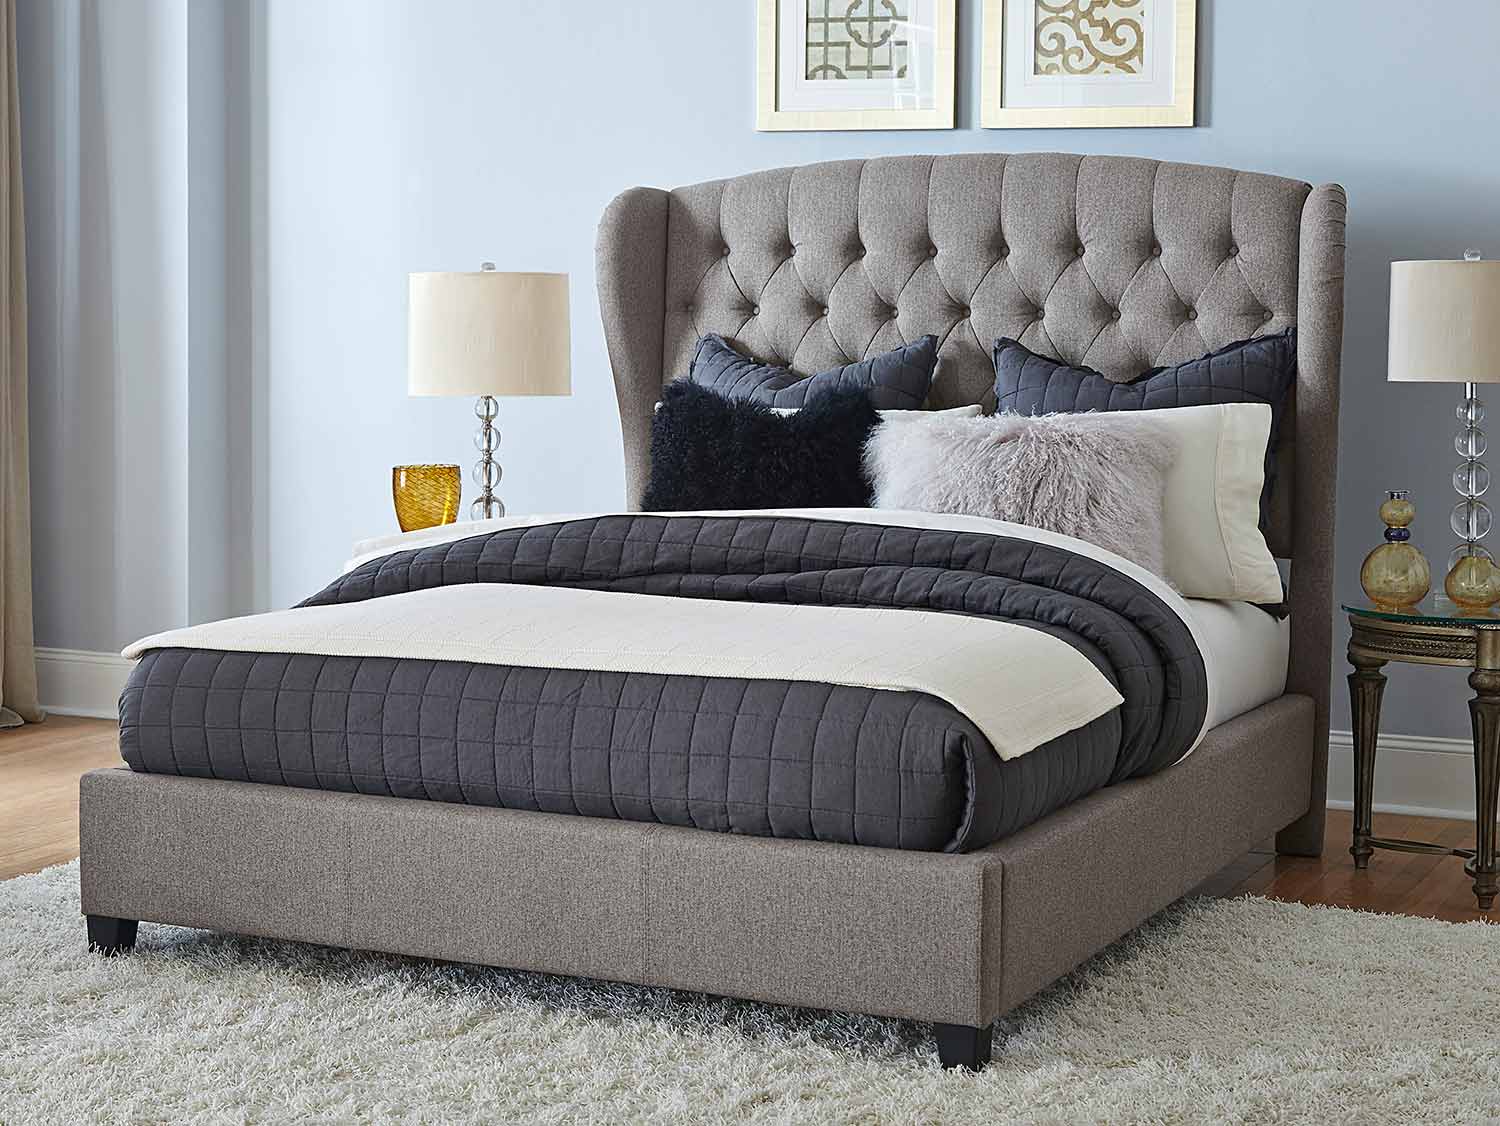 Hillsdale Bromley Upholstered Bed - Orly Gray Fabric